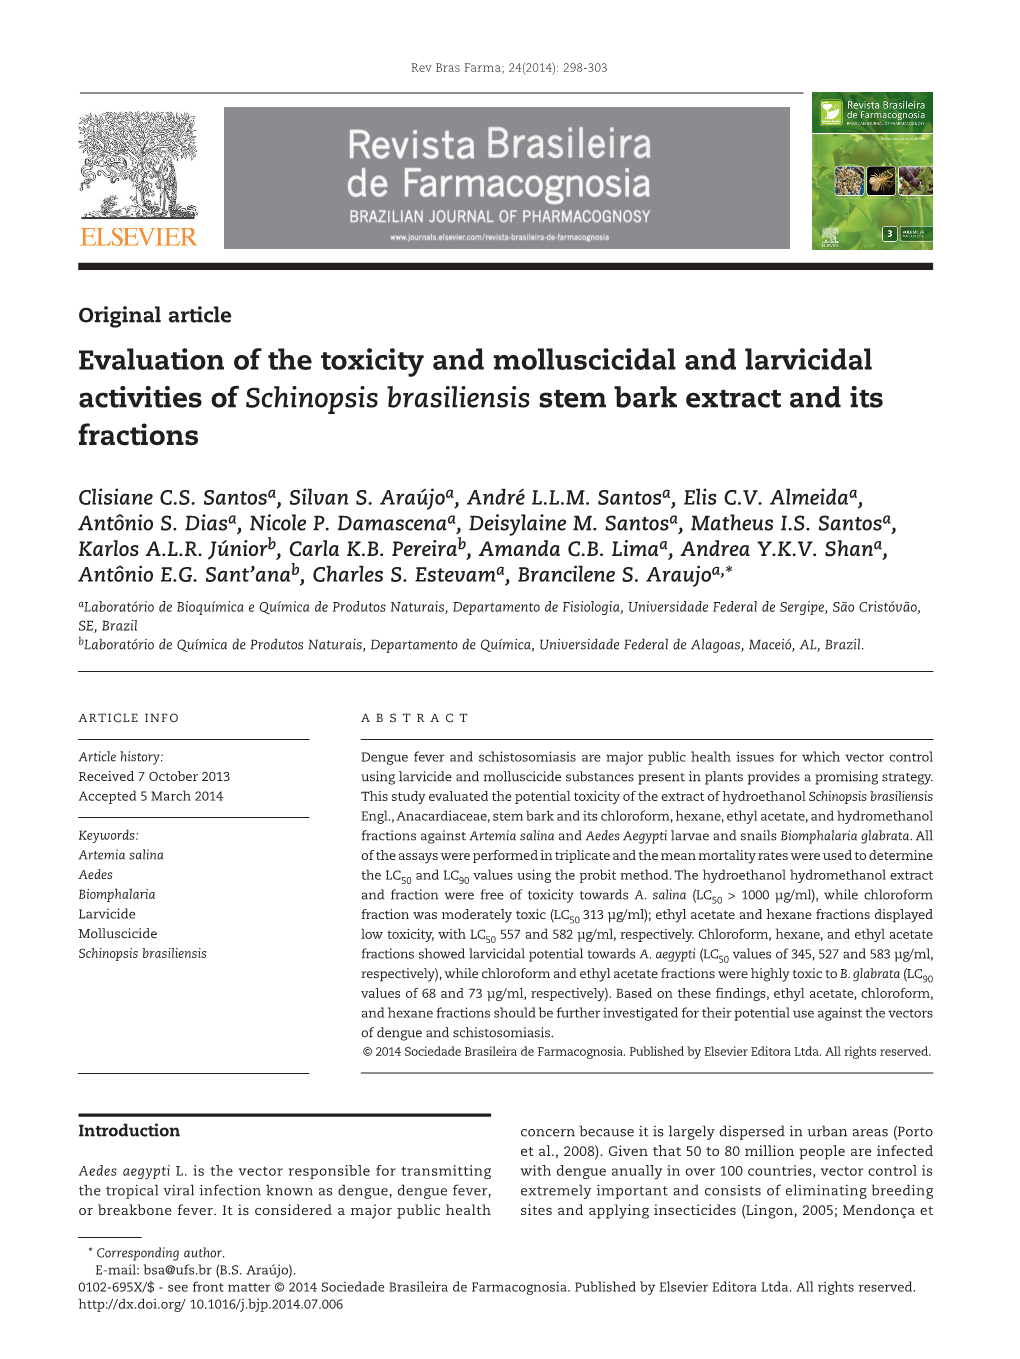 Evaluation of the Toxicity and Molluscicidal and Larvicidal Activities of Schinopsis Brasiliensis Stem Bark Extract and Its Fractions